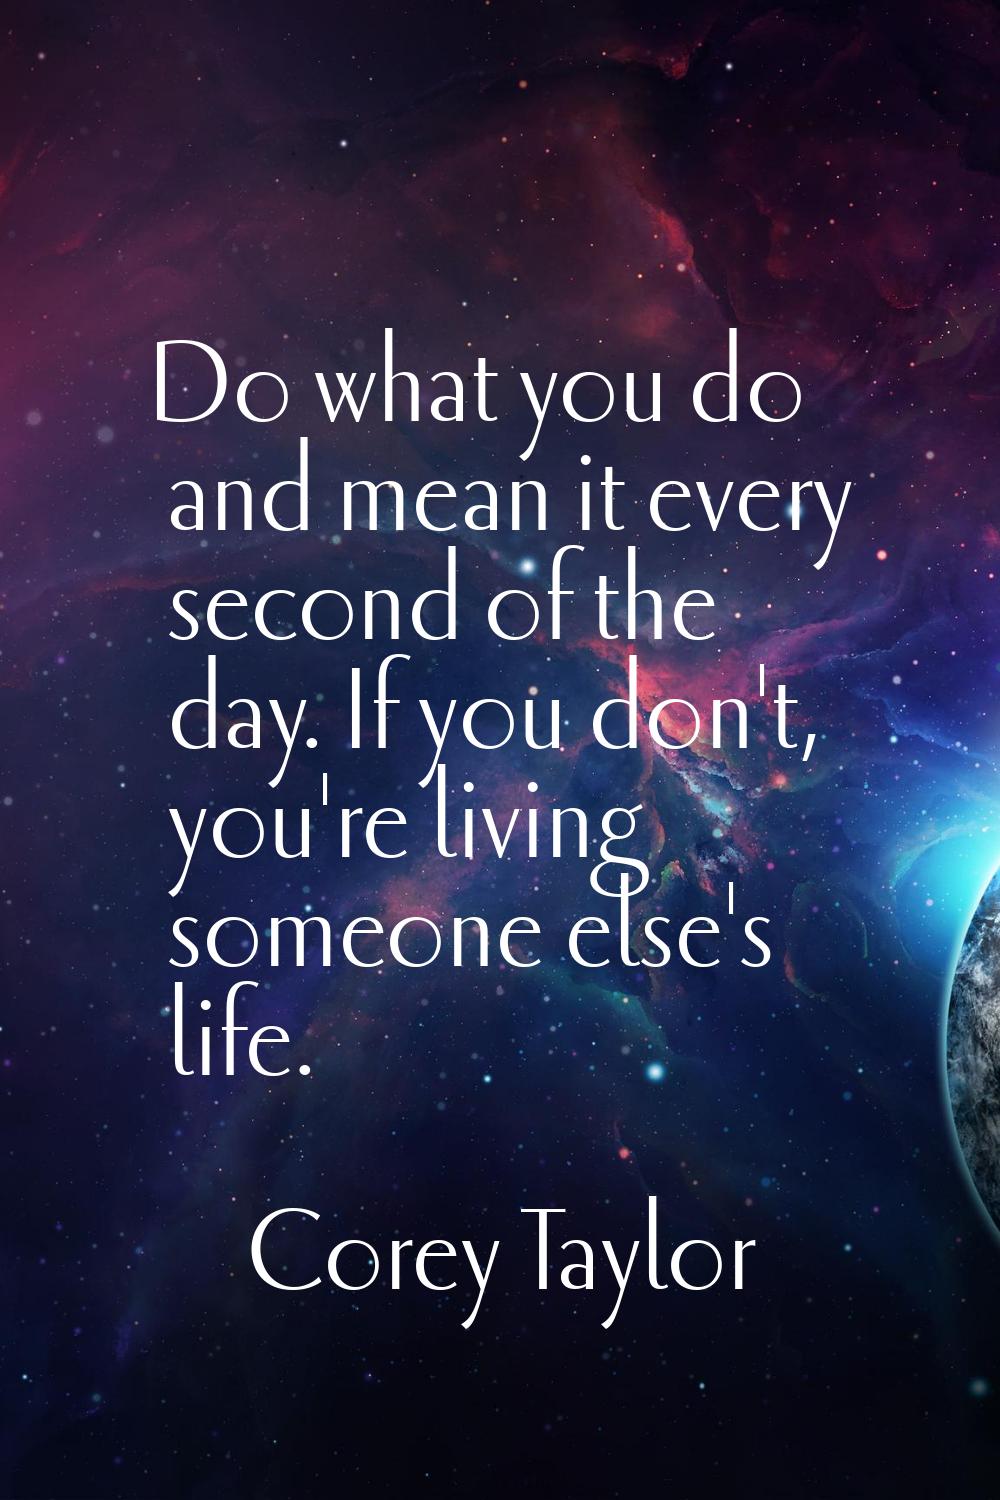 Do what you do and mean it every second of the day. If you don't, you're living someone else's life